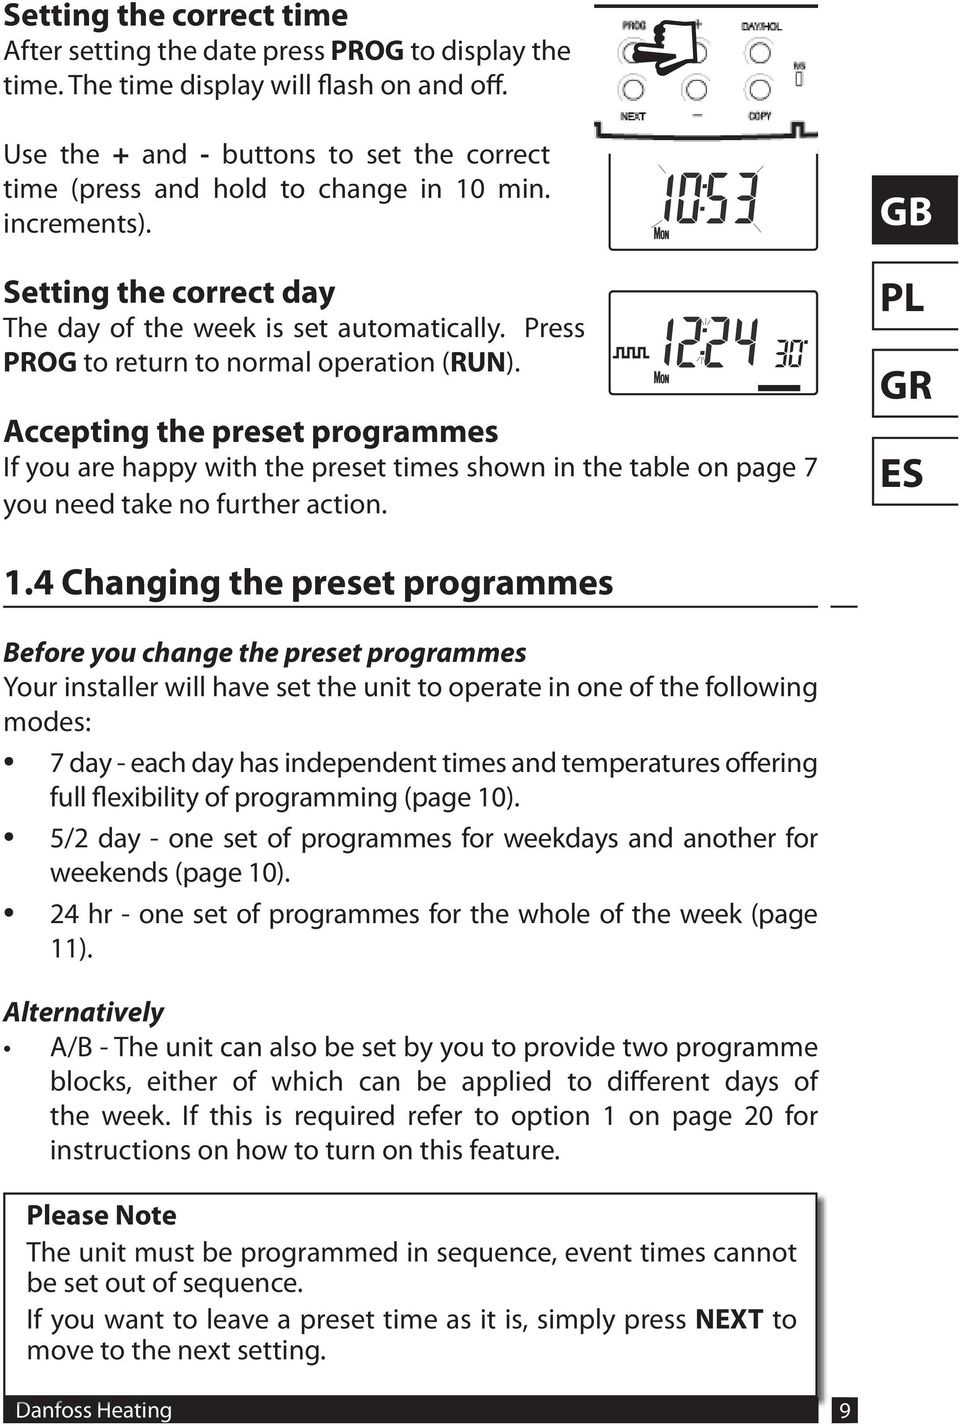 Press PROG to return to normal operation (RUN). Accepting the preset programmes If you are happy with the preset times shown in the table on page 7 you need take no further action. 1.